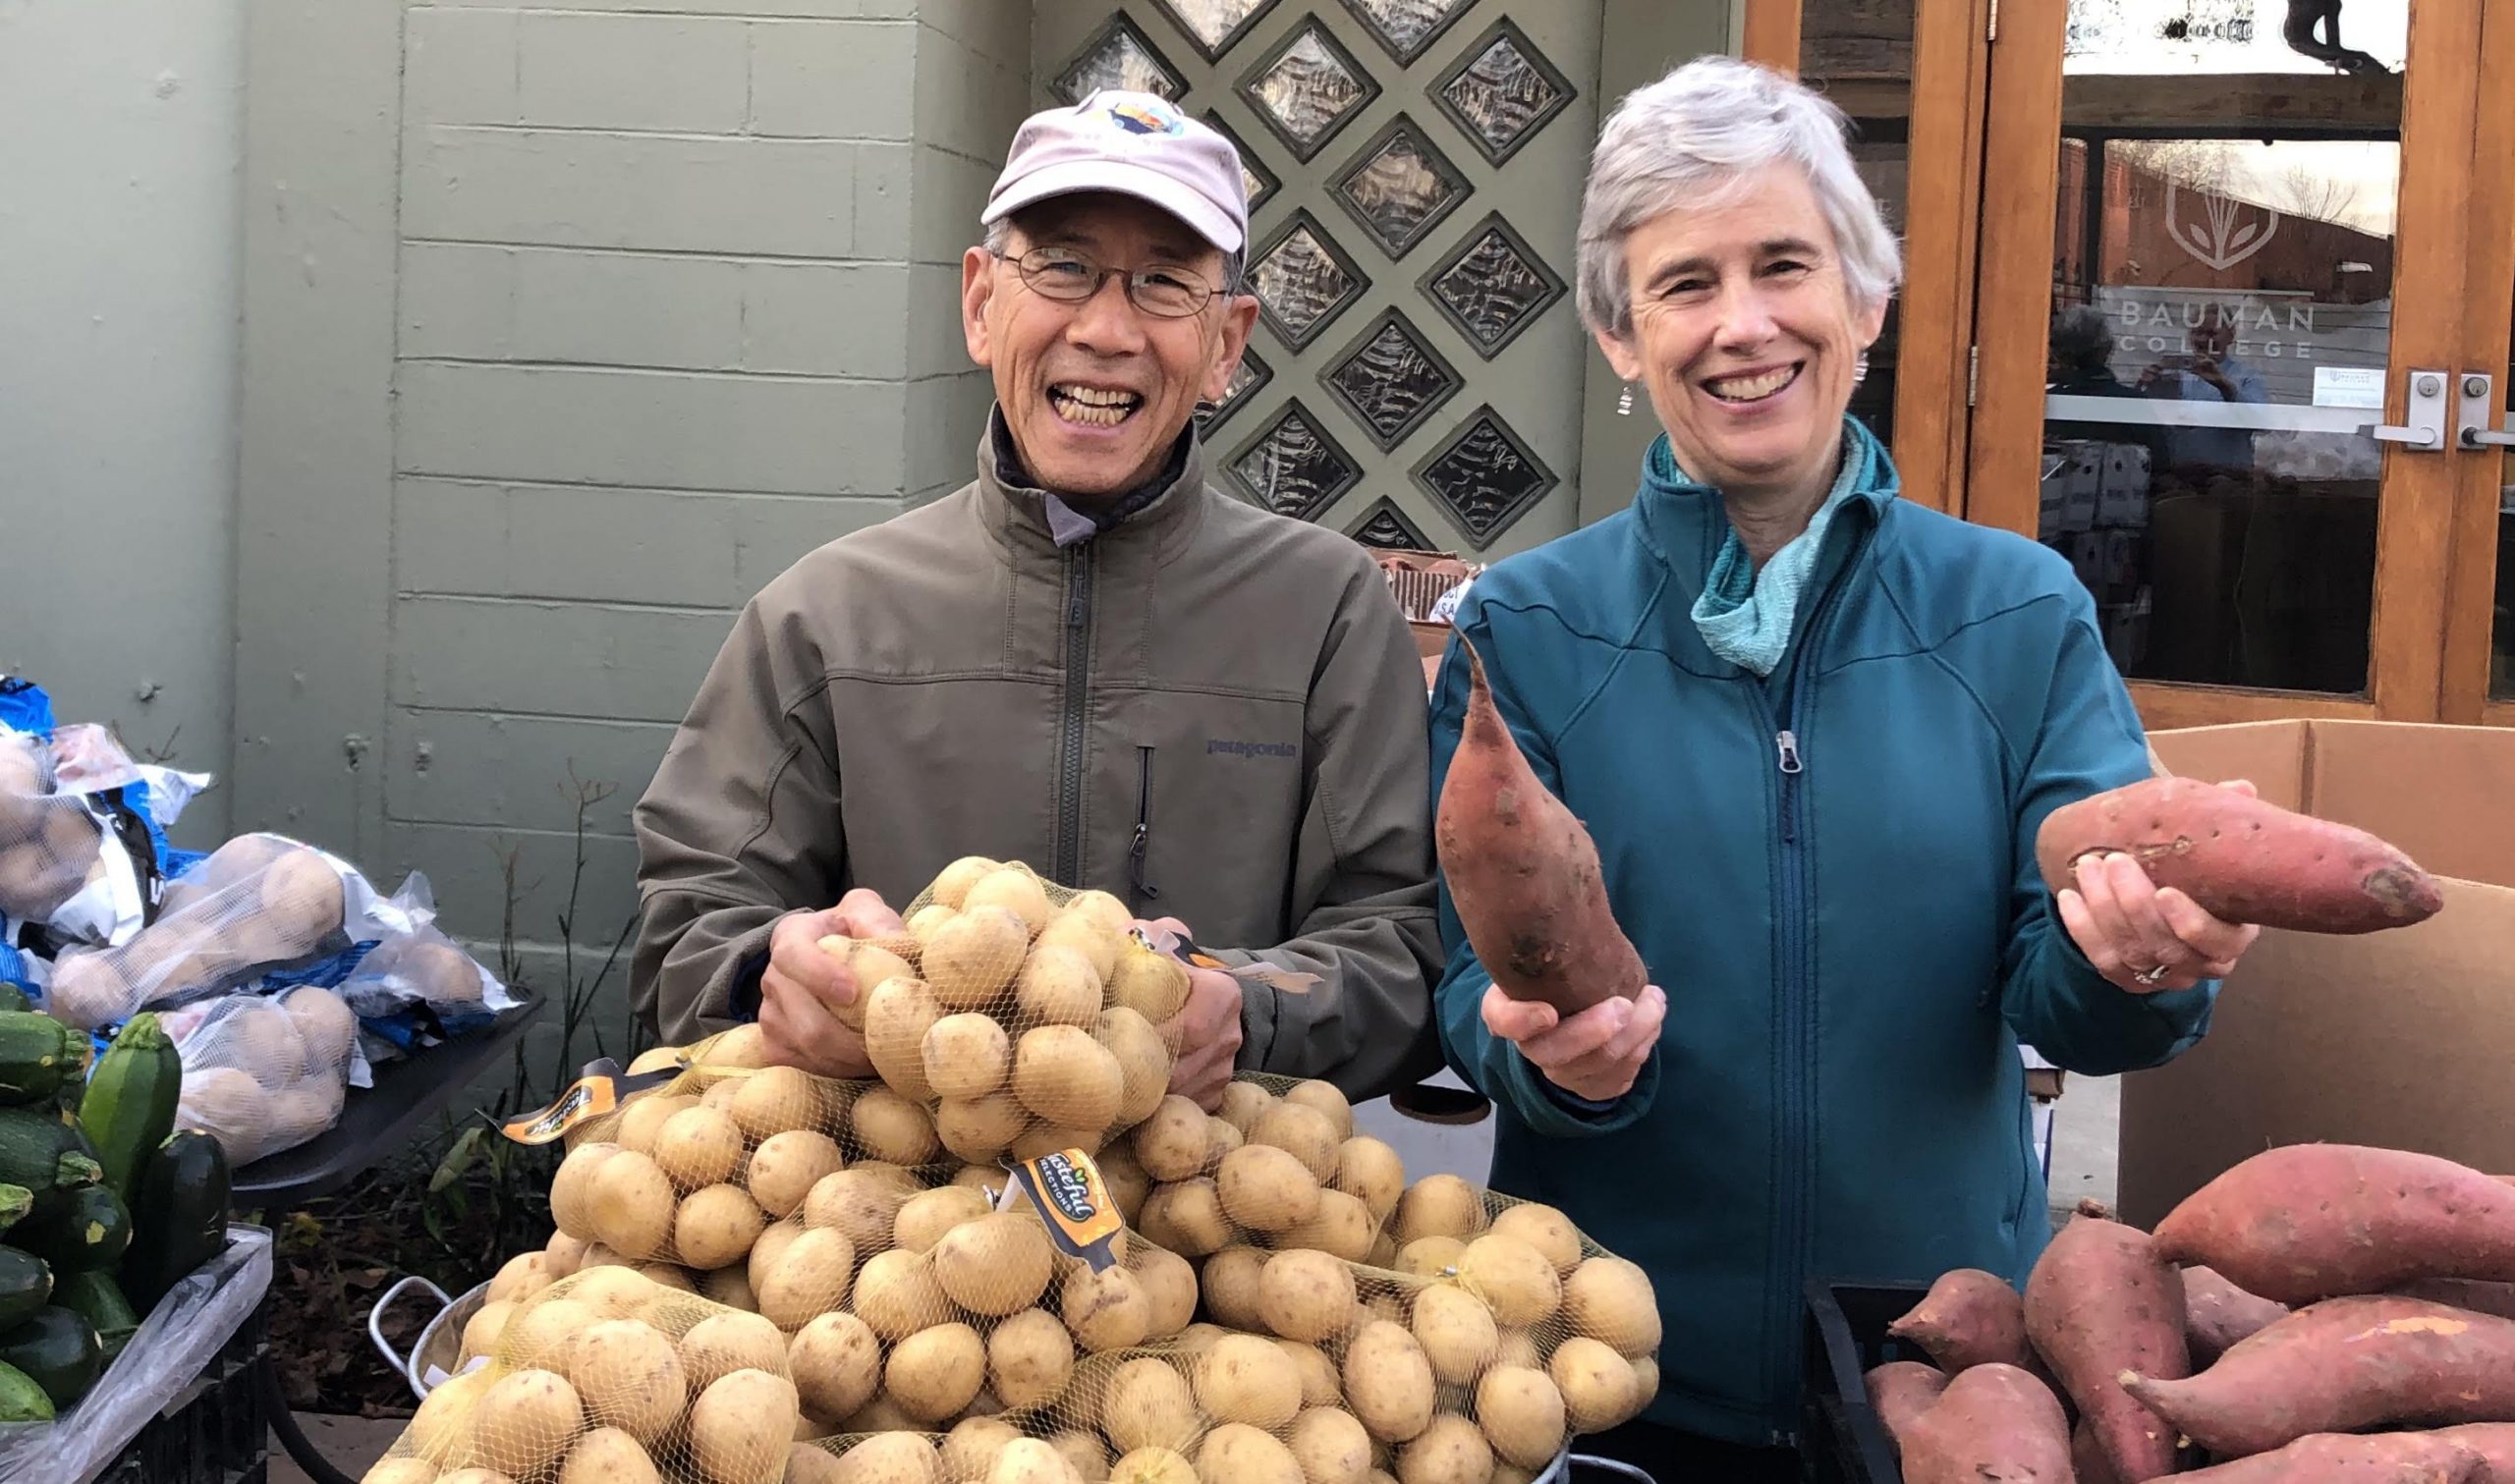 Major Hunger-Relief Investment Will Help Alleviate Growing Food Insecurity in Berkeley